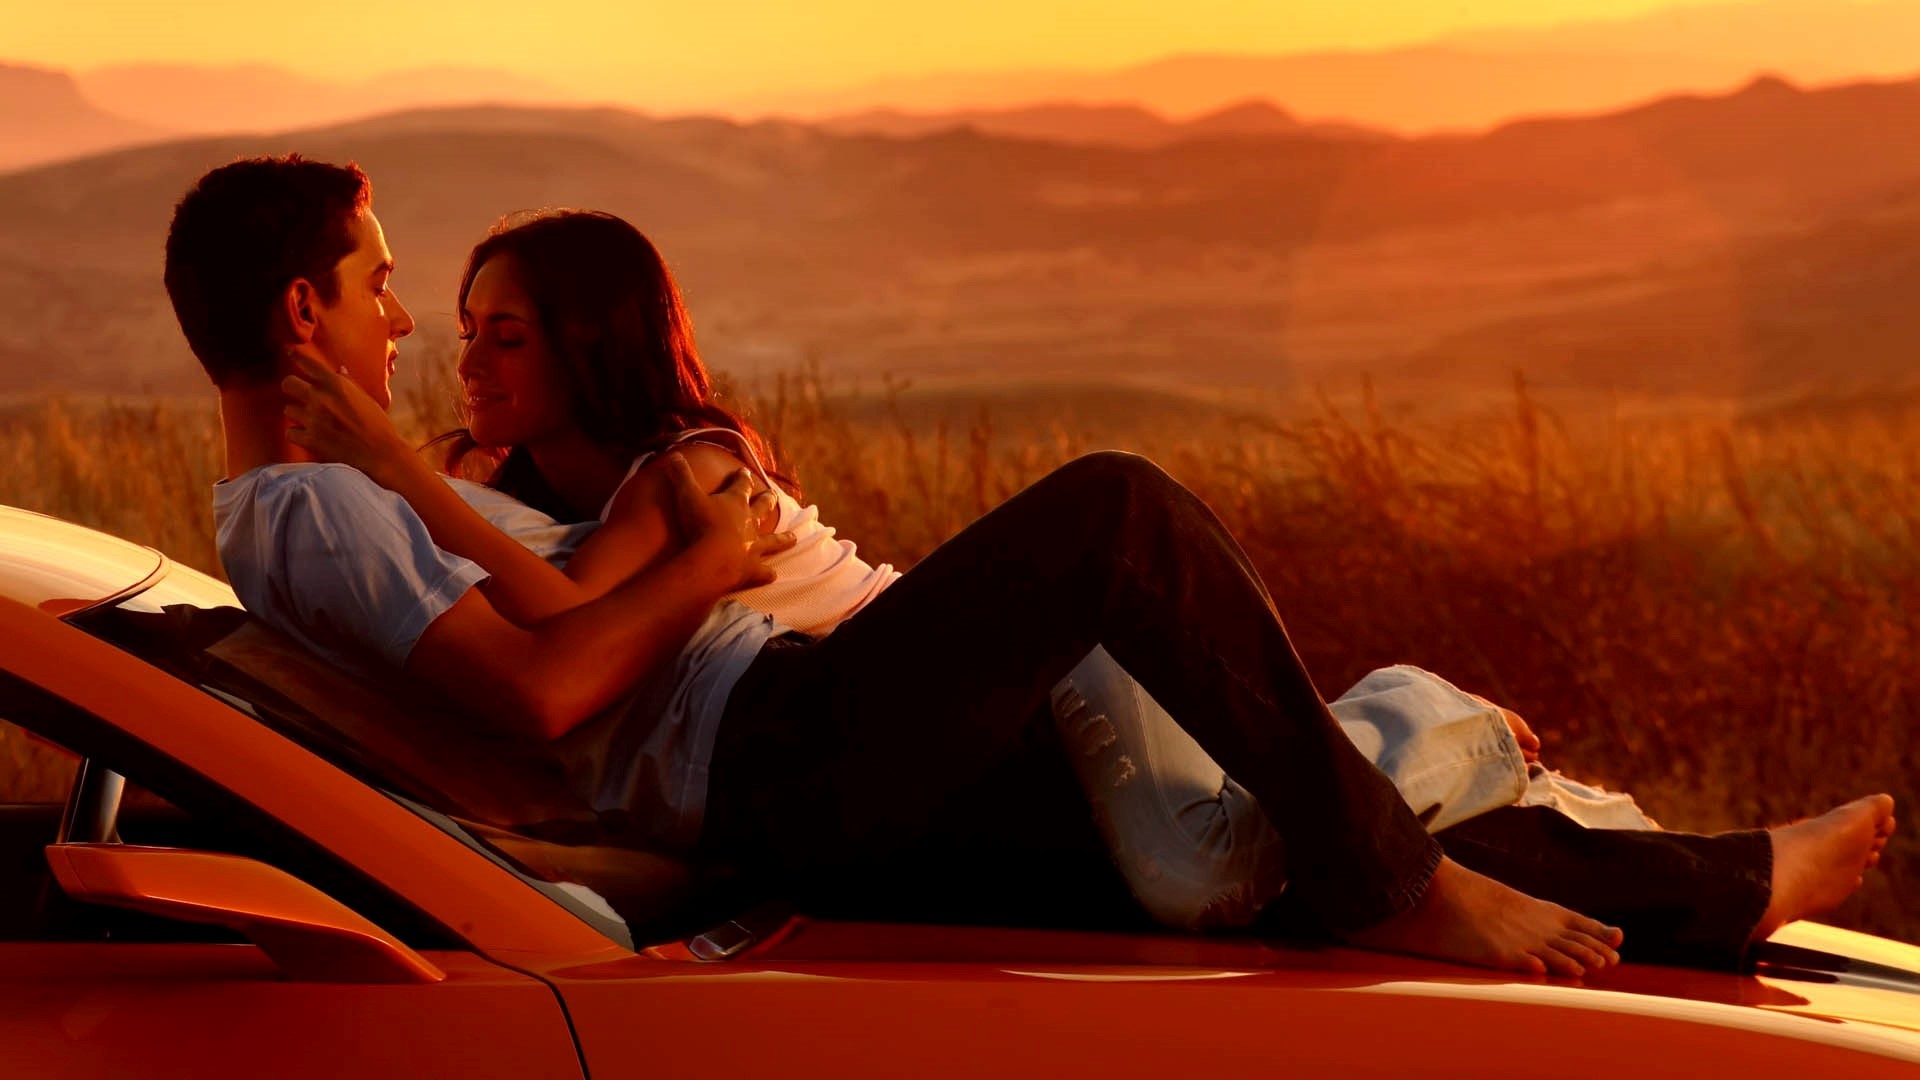 Romantic Couple doing Romance in Car HD Wallpapers HD Wallpapers